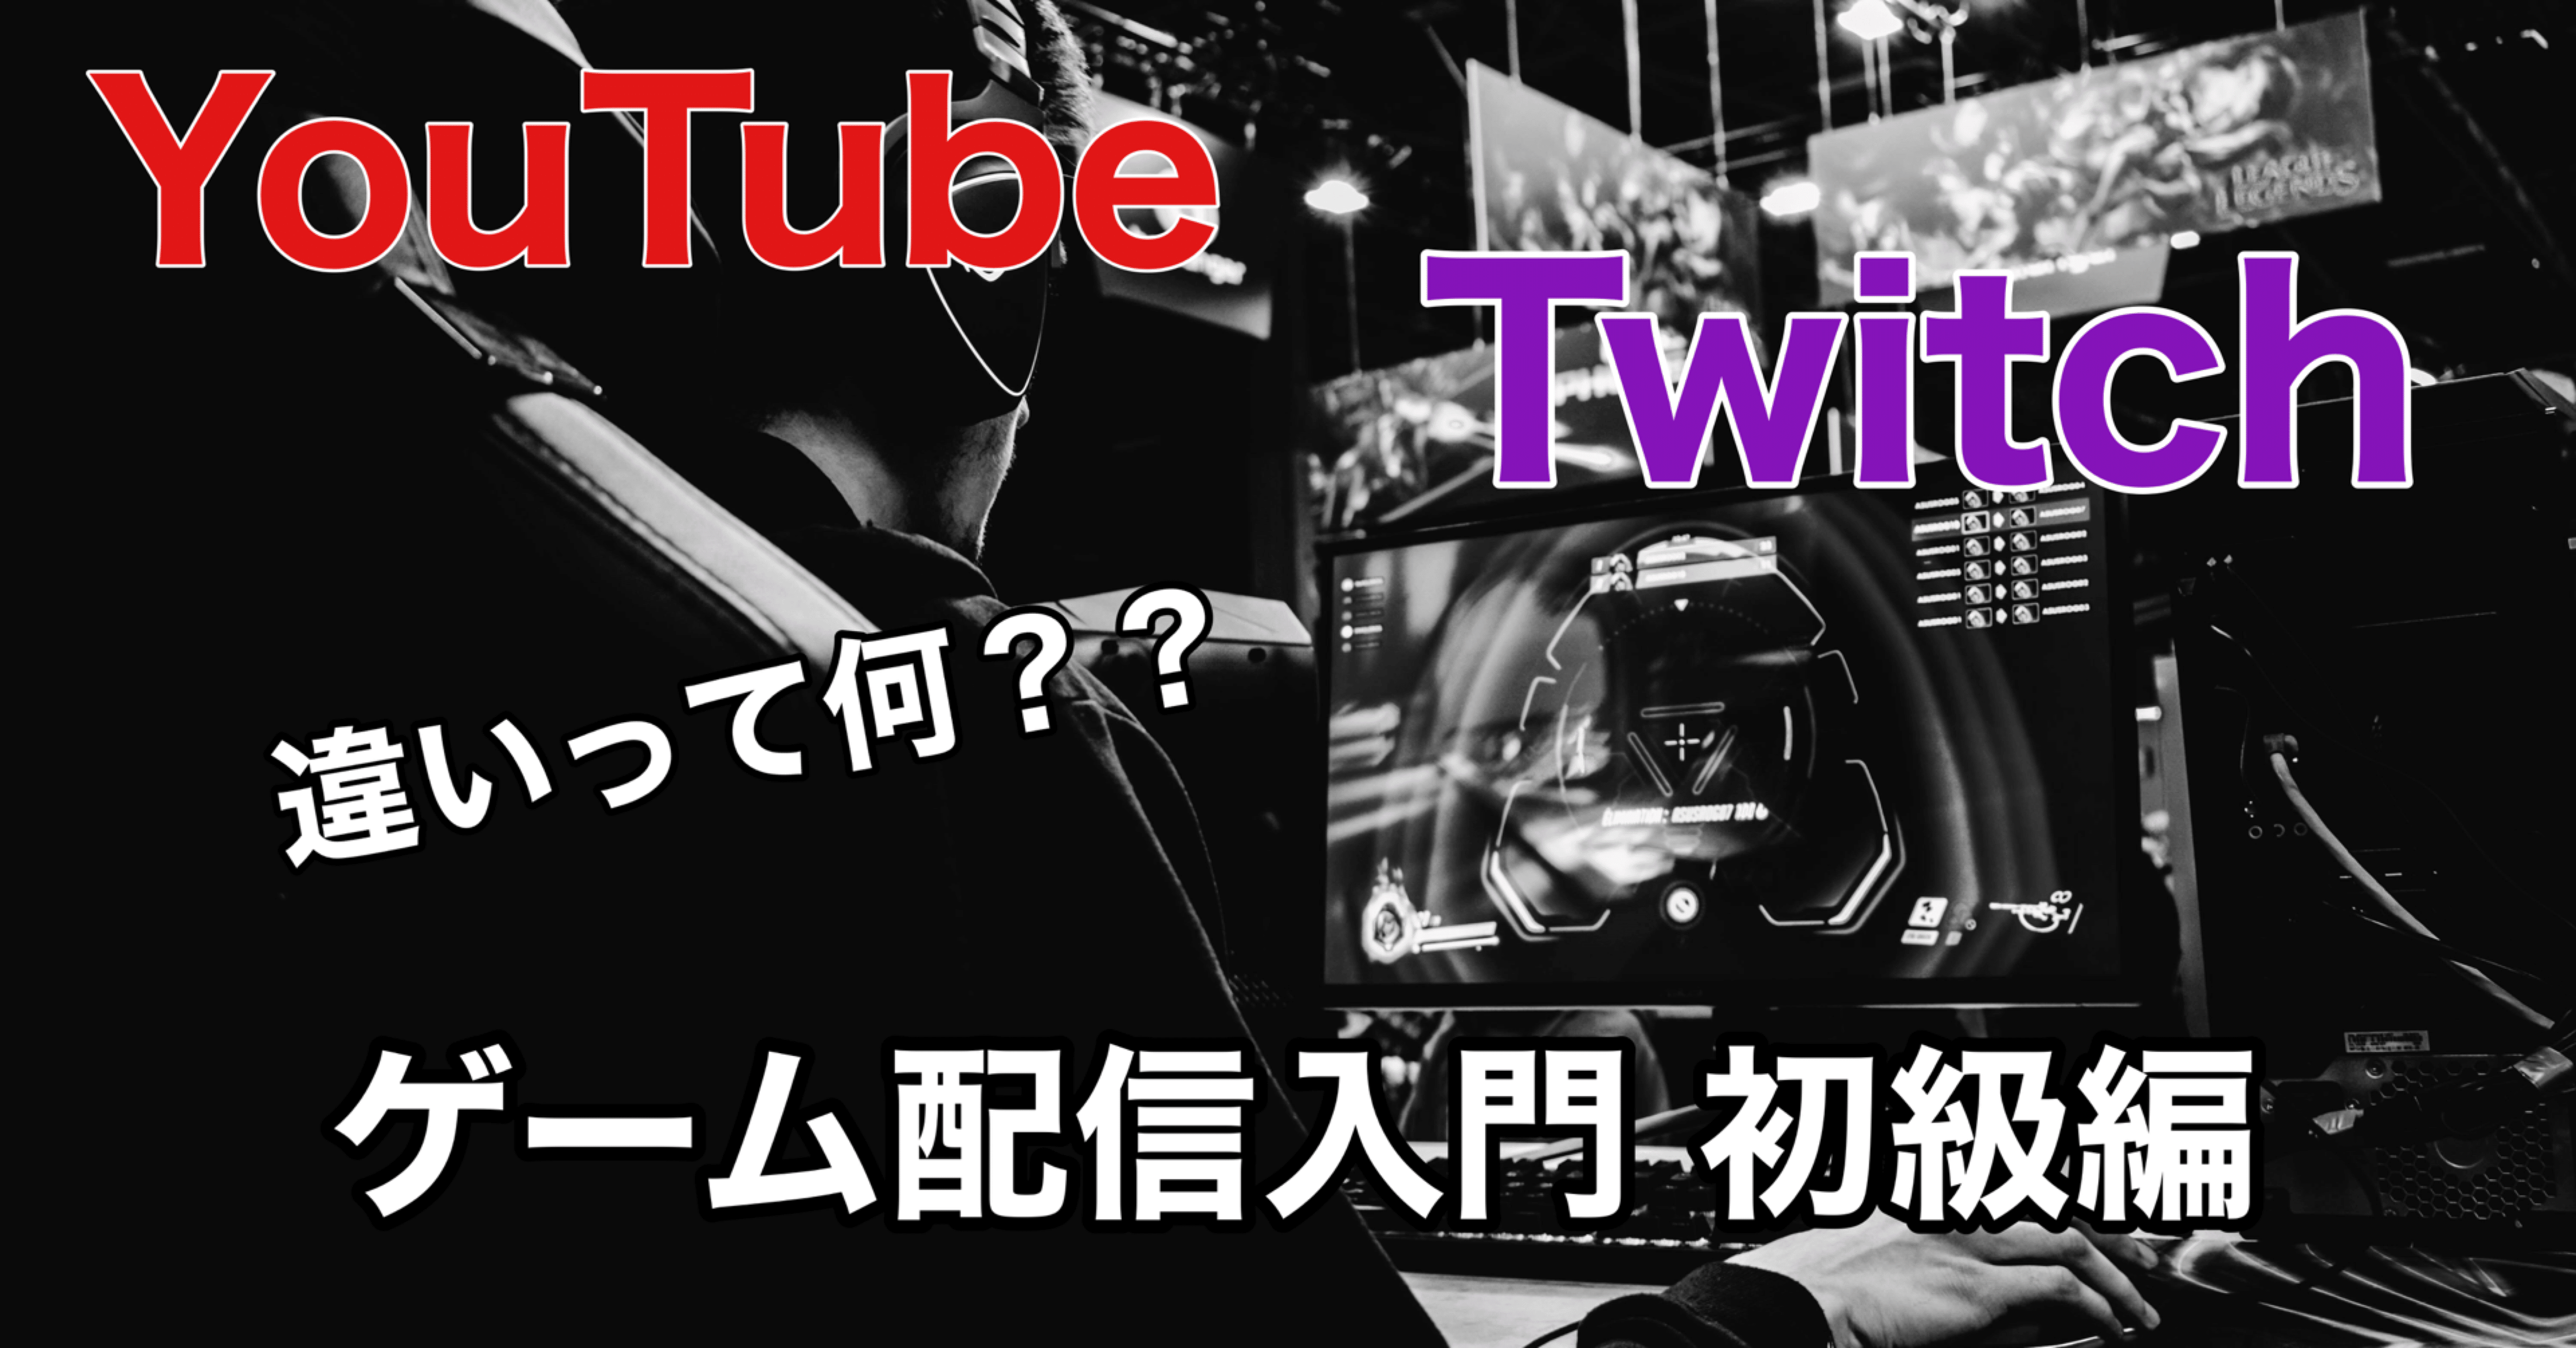 Youtubeとtwitch ゲーム配信 初級編 Hys ひす 毎日ゲームnote Note